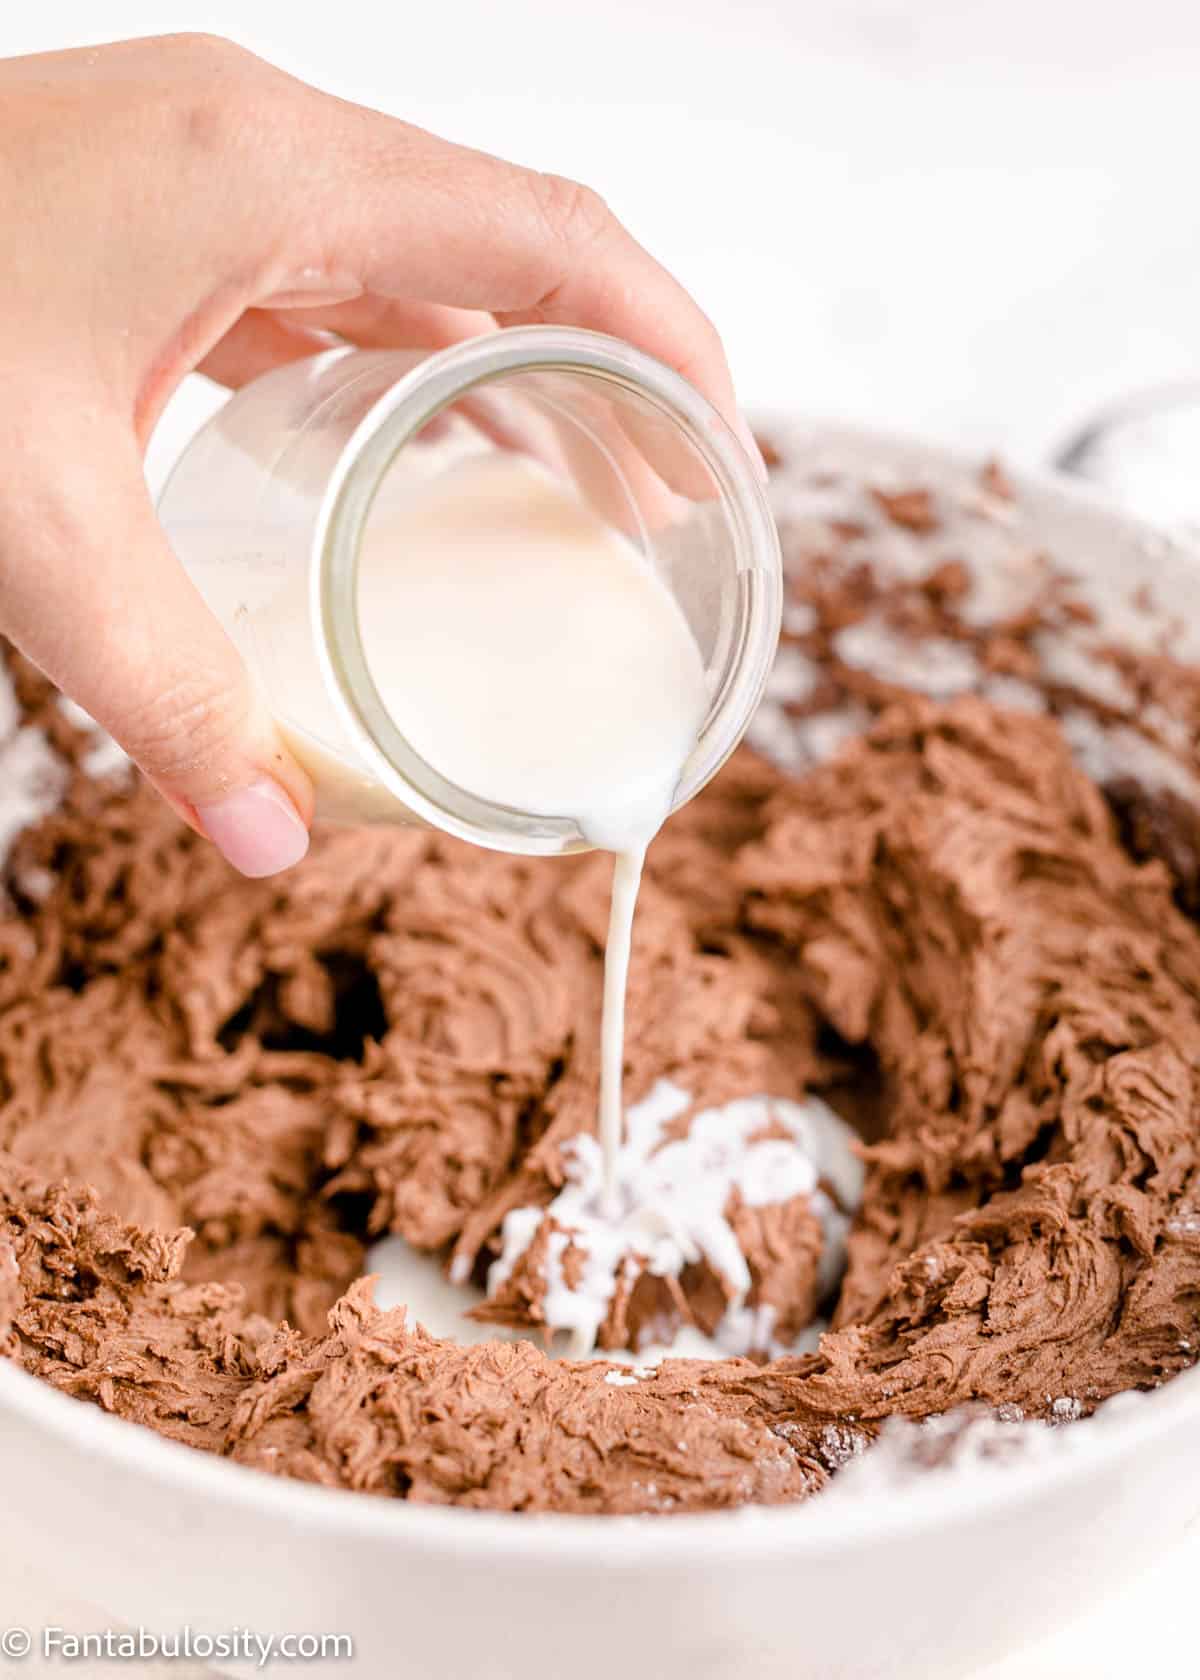 Pour in milk to frosting to thin